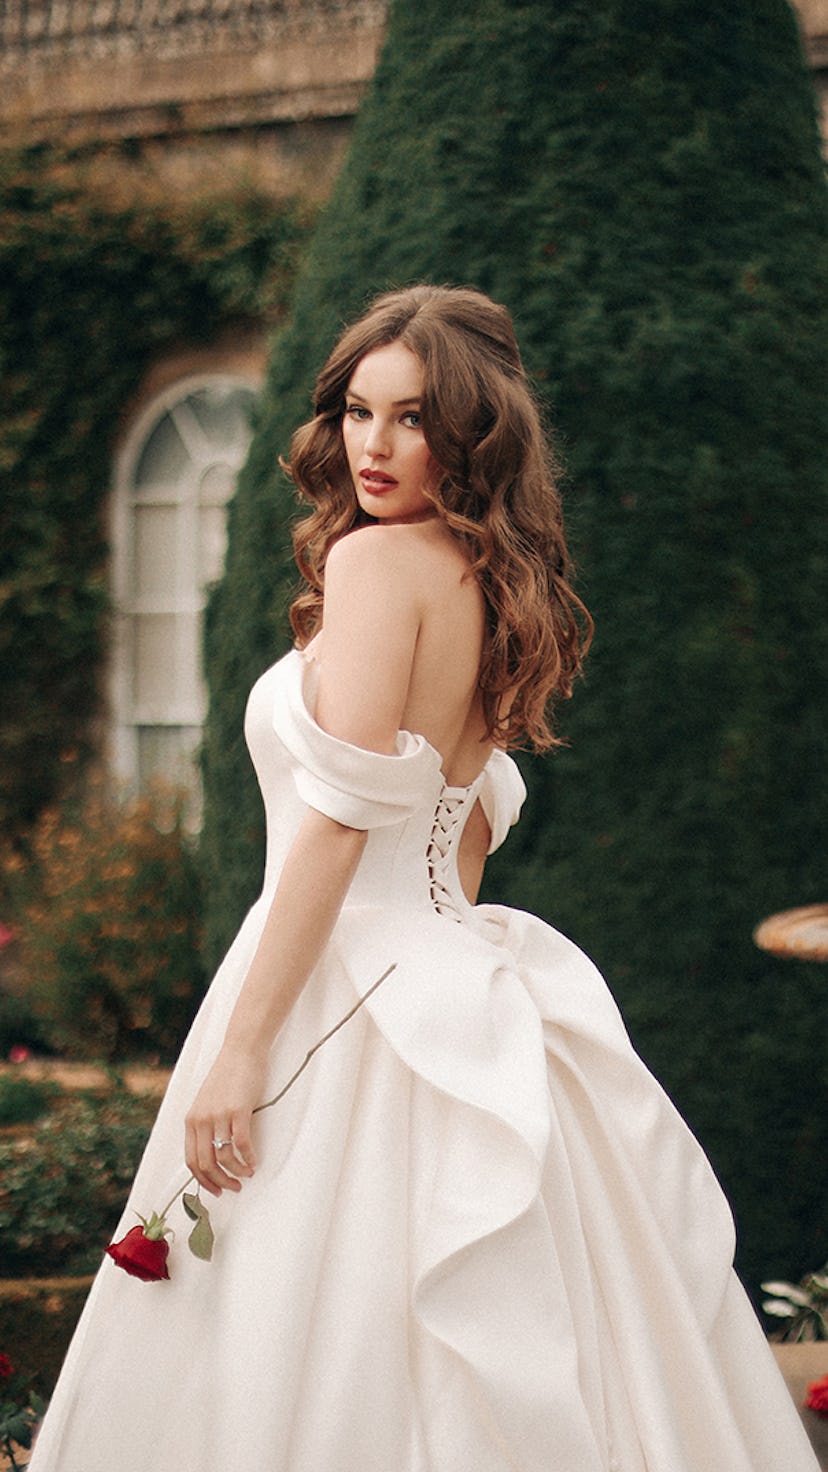 The Disney's Fairy Tales wedding dress inspired by Belle features a giant lace up bow in the back. 